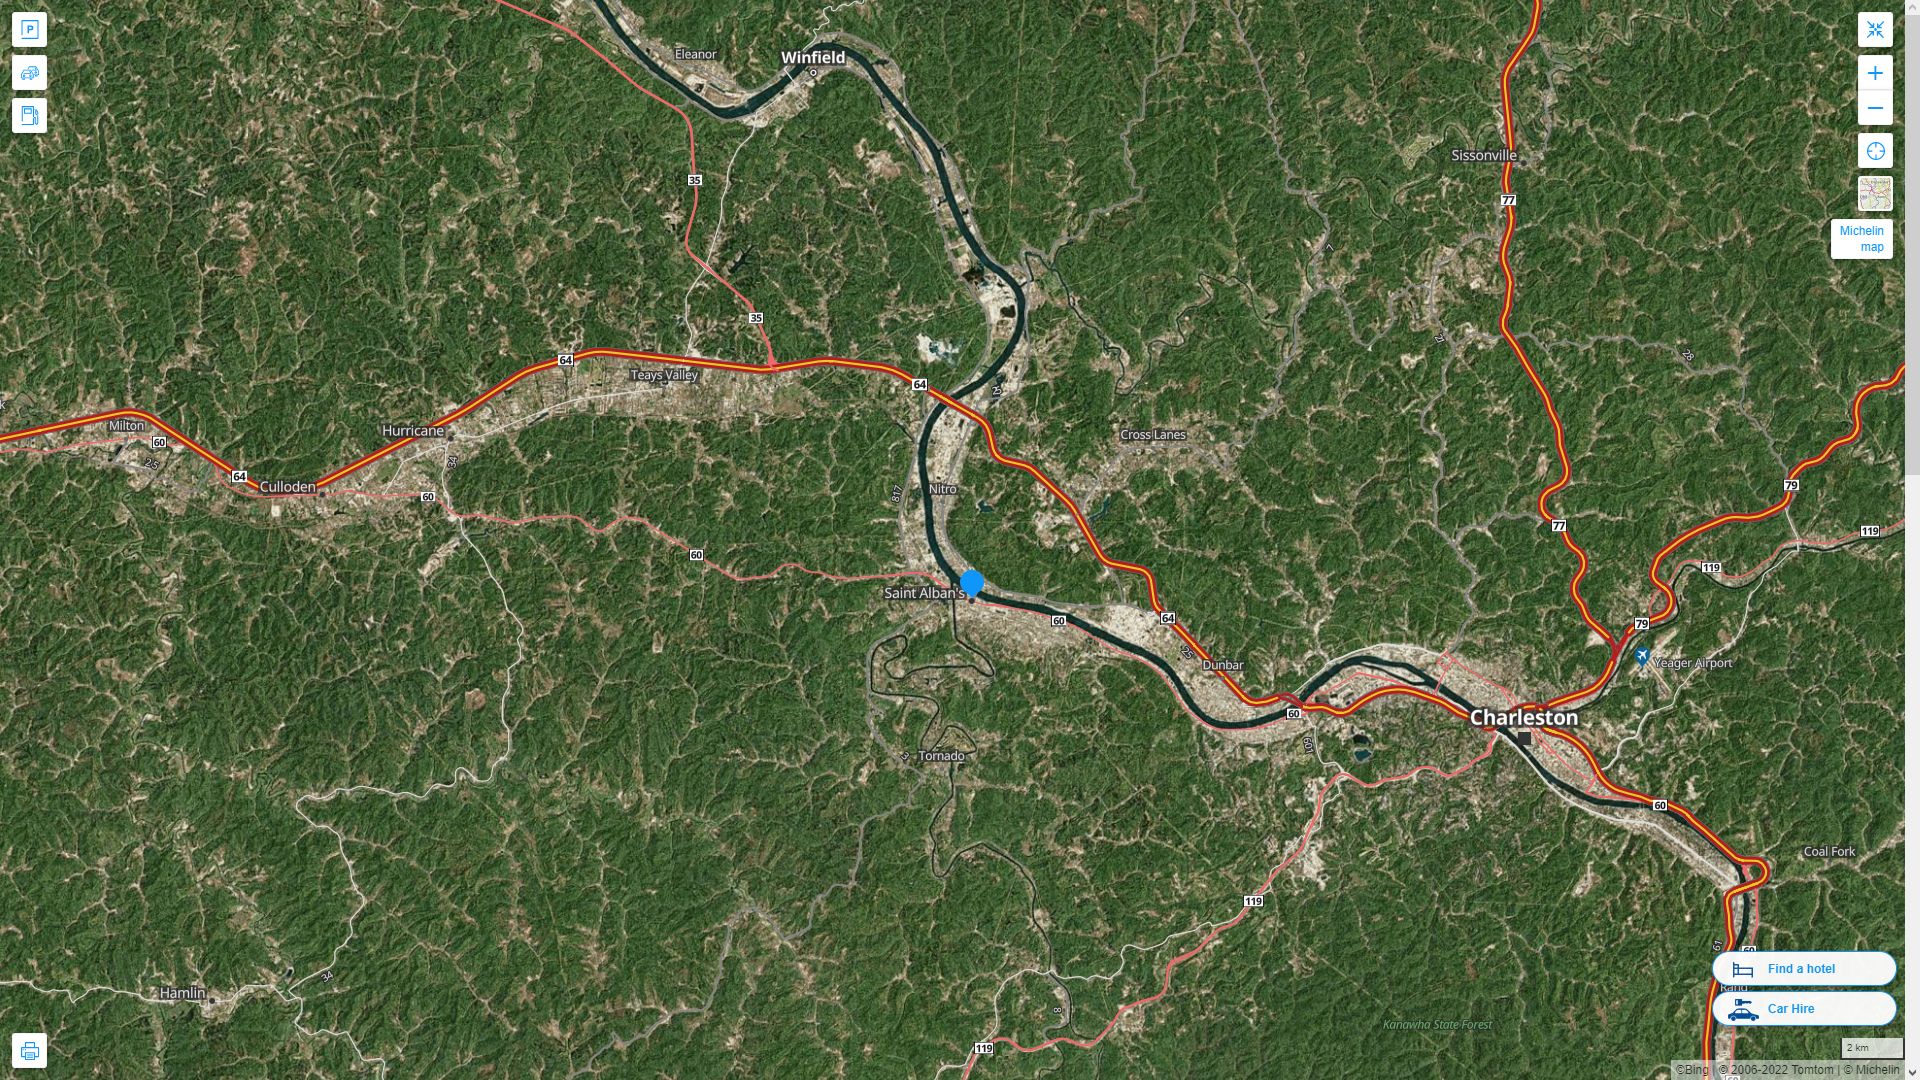 St. Albans West Virginia Highway and Road Map with Satellite View